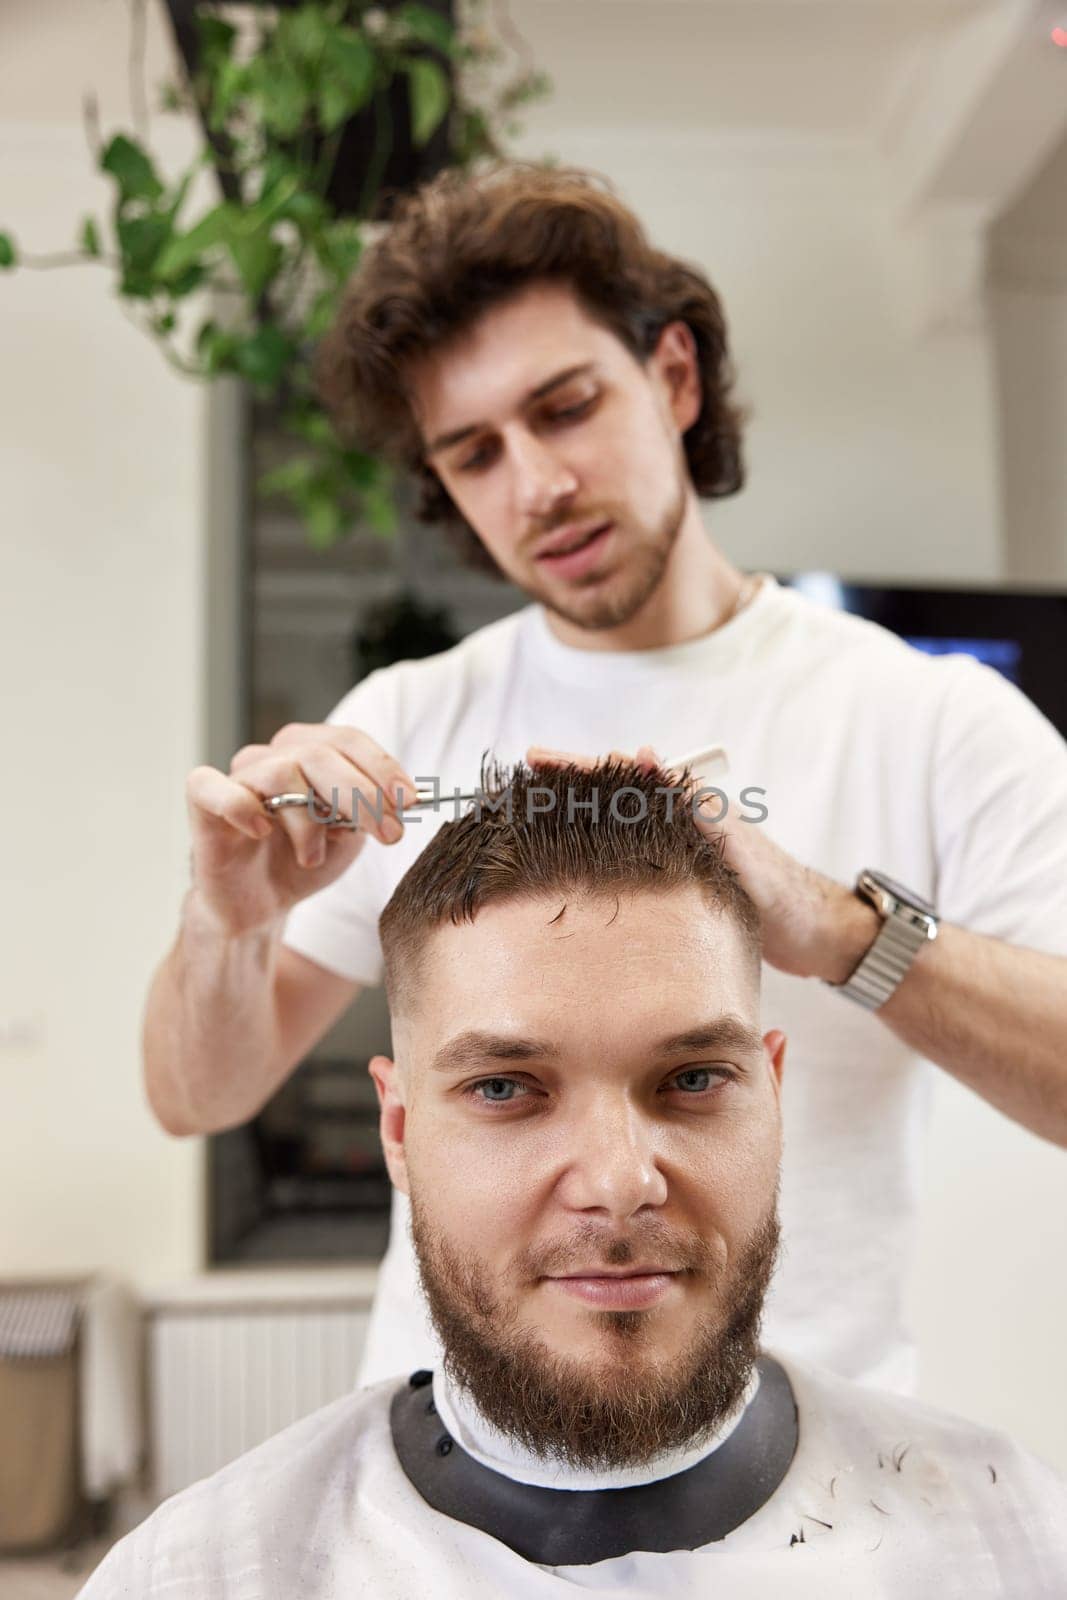 hairdresser does haircut for caucasian bearded man using comb and grooming scissors in barber shop.